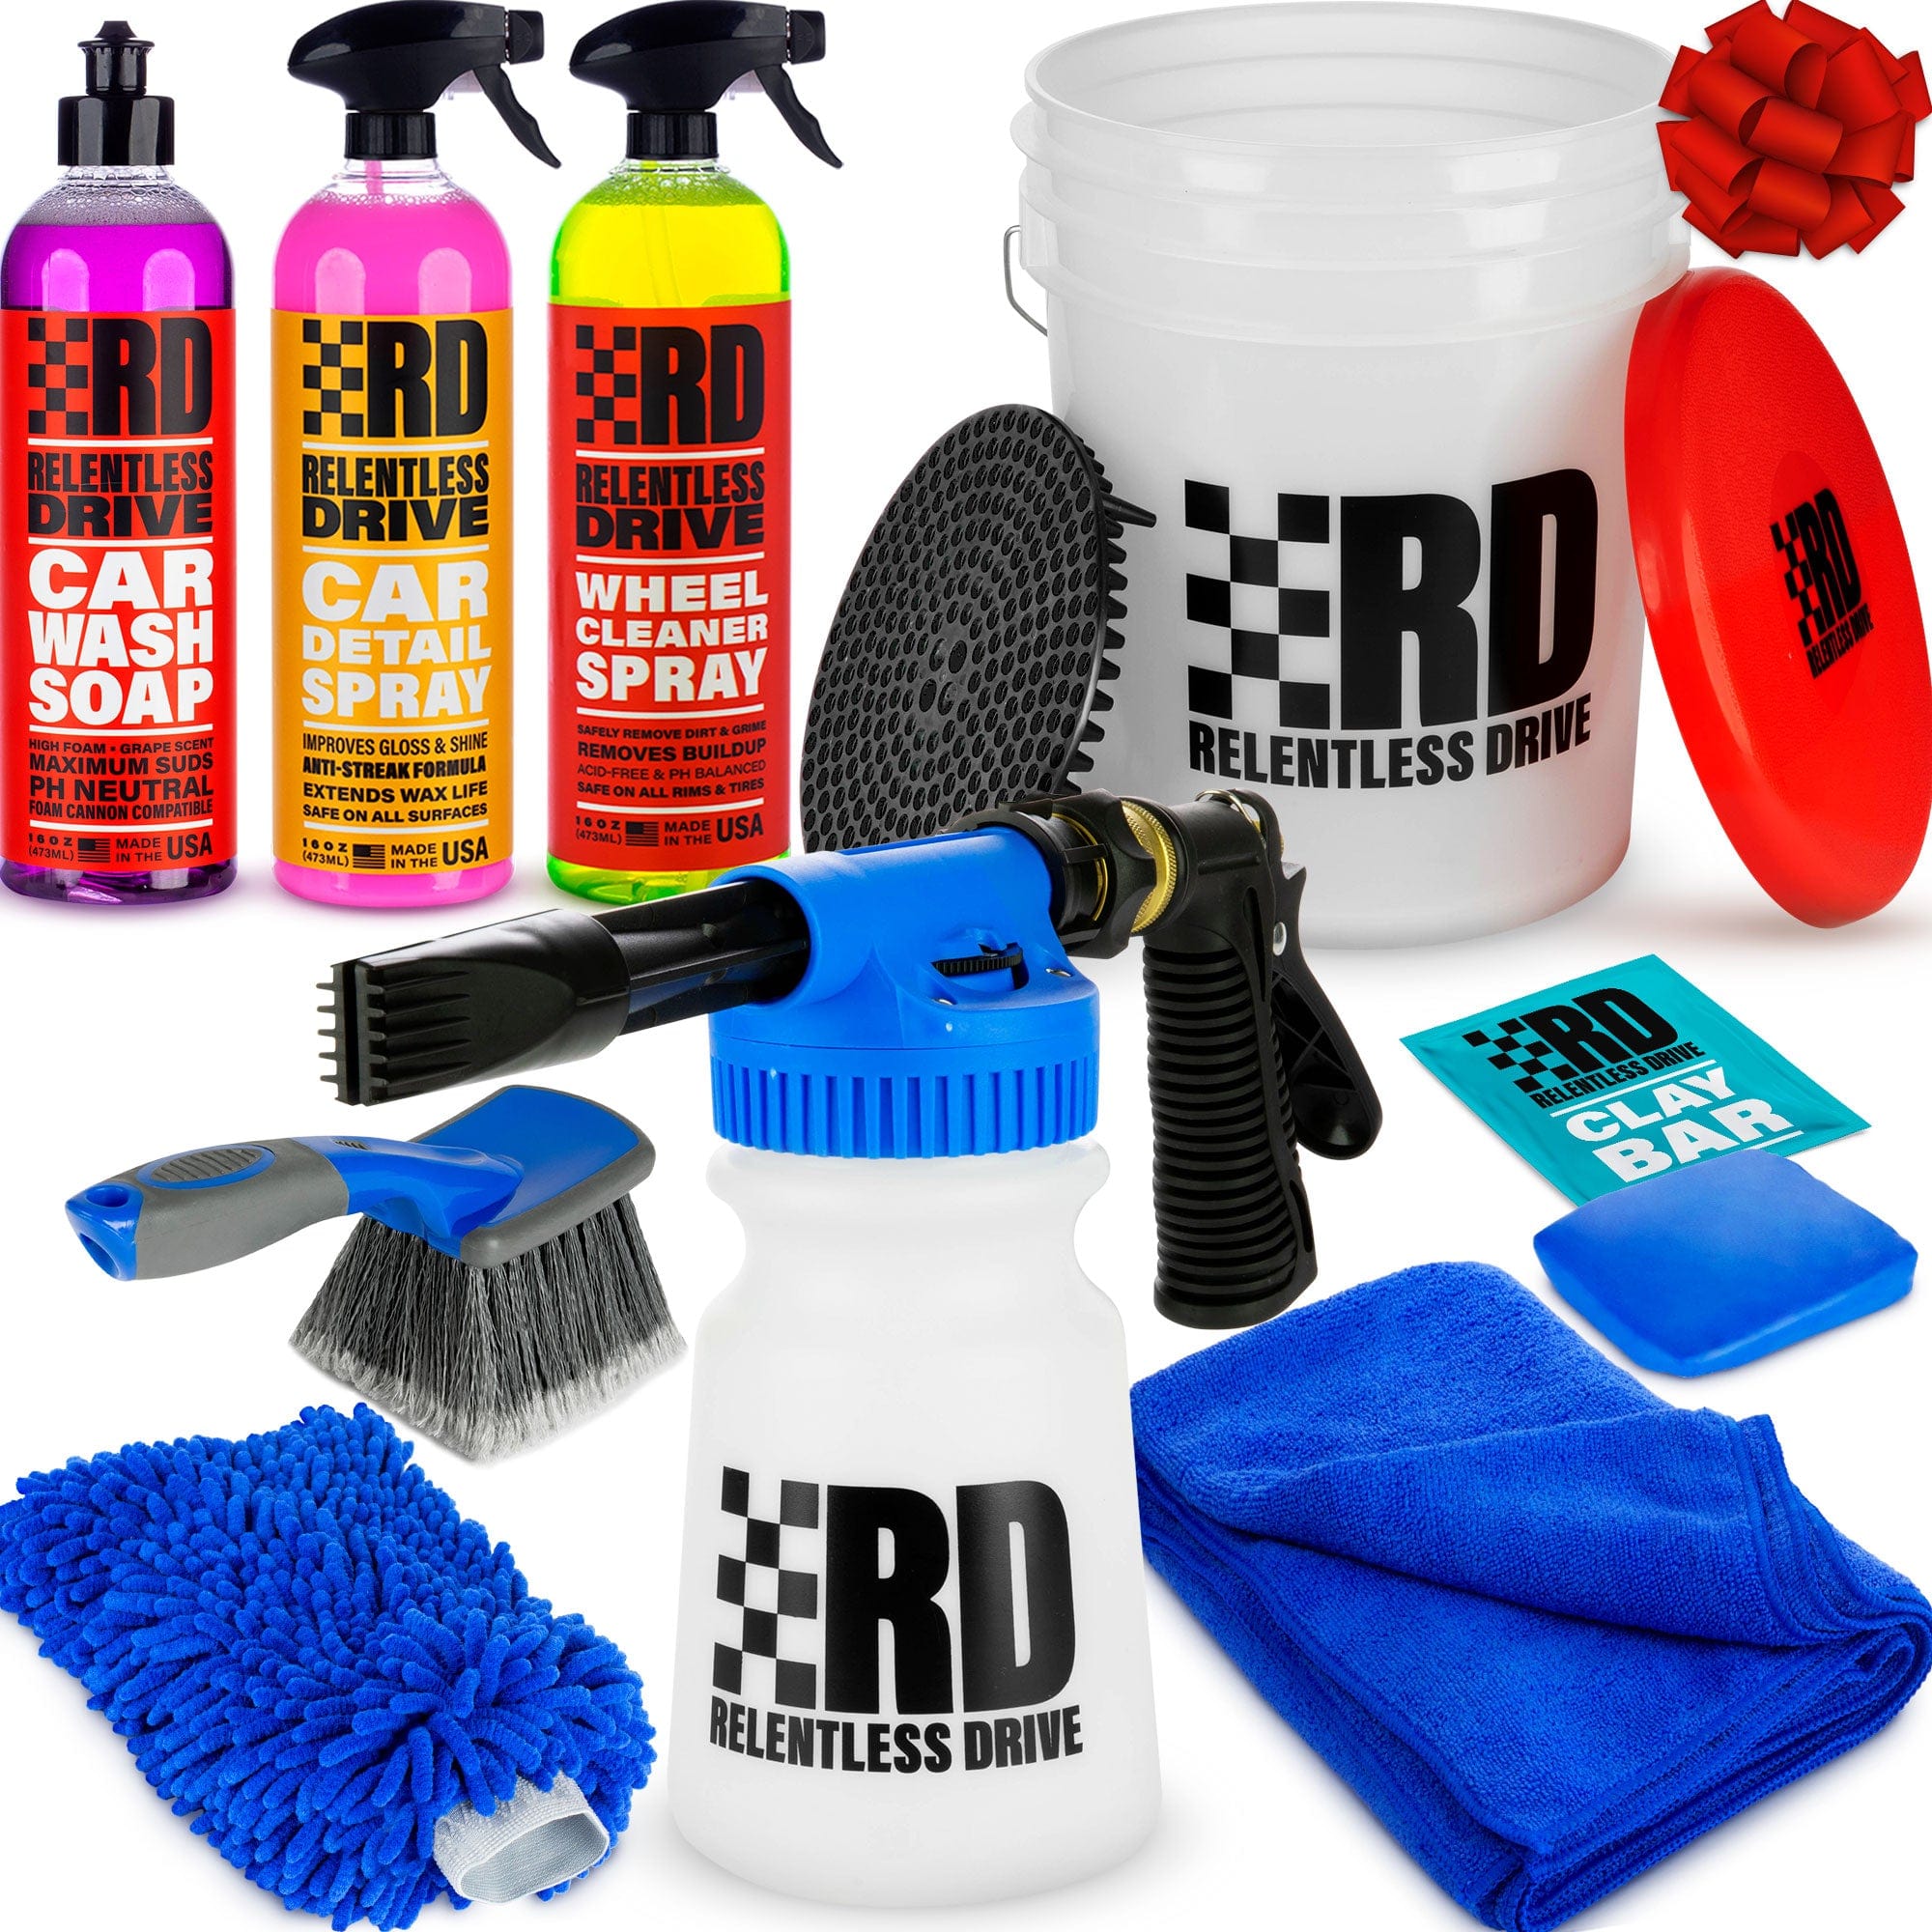 Relentless Drive Deluxe Car Wash Kit - Car Cleaning Kit with Car Wash Foam  Gun & 5 Gallon Car Wash Bucket - Complete Car Detailing Kit Comes for a